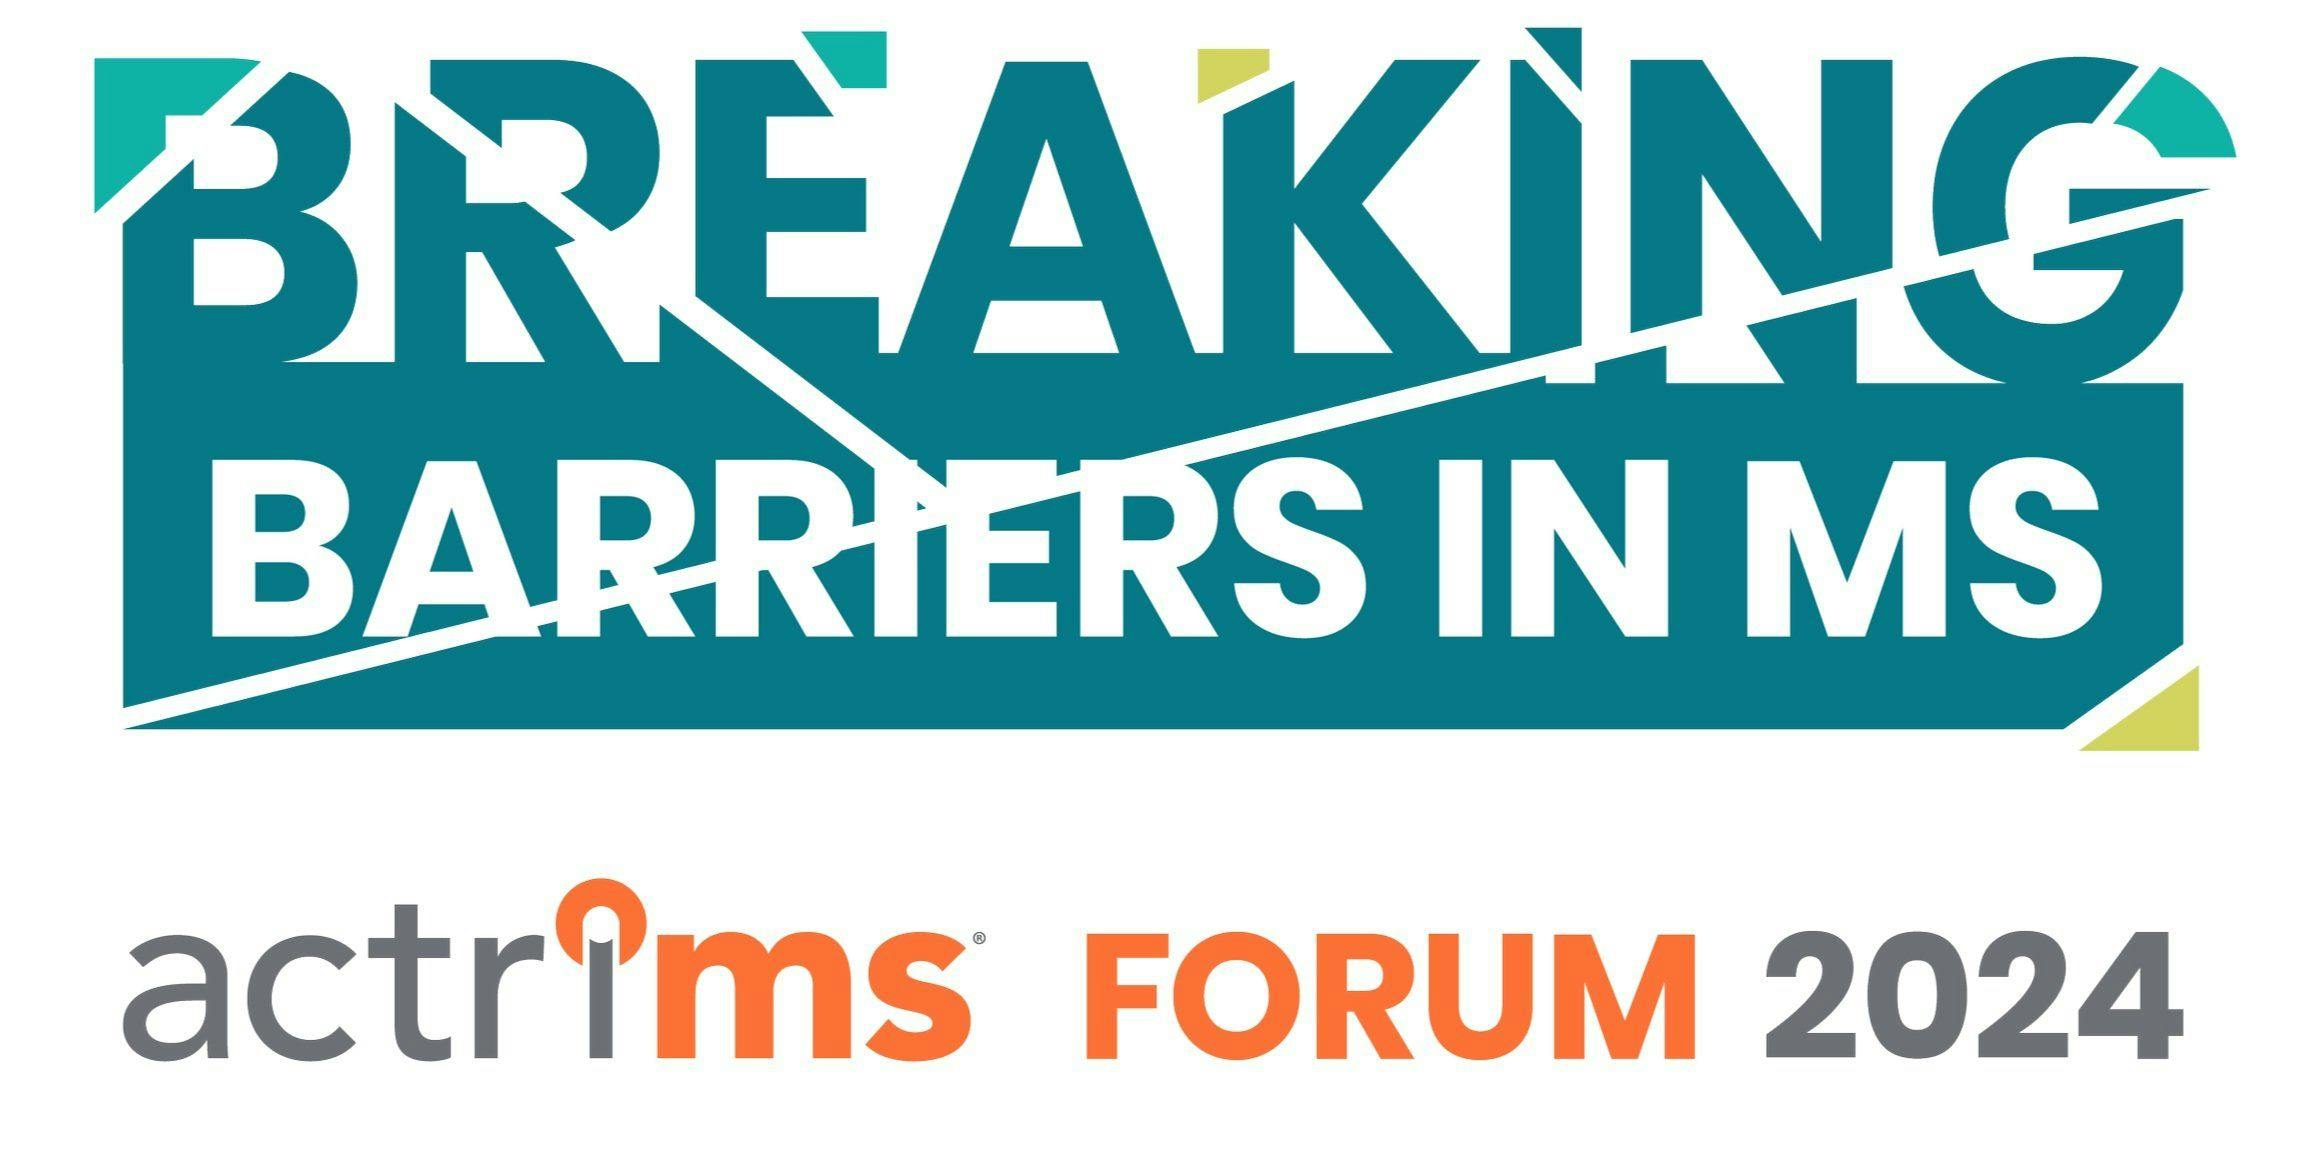 Breaking Barriers in MS ACTRIMS Forum 2024 | image credit: forum.actrims.org